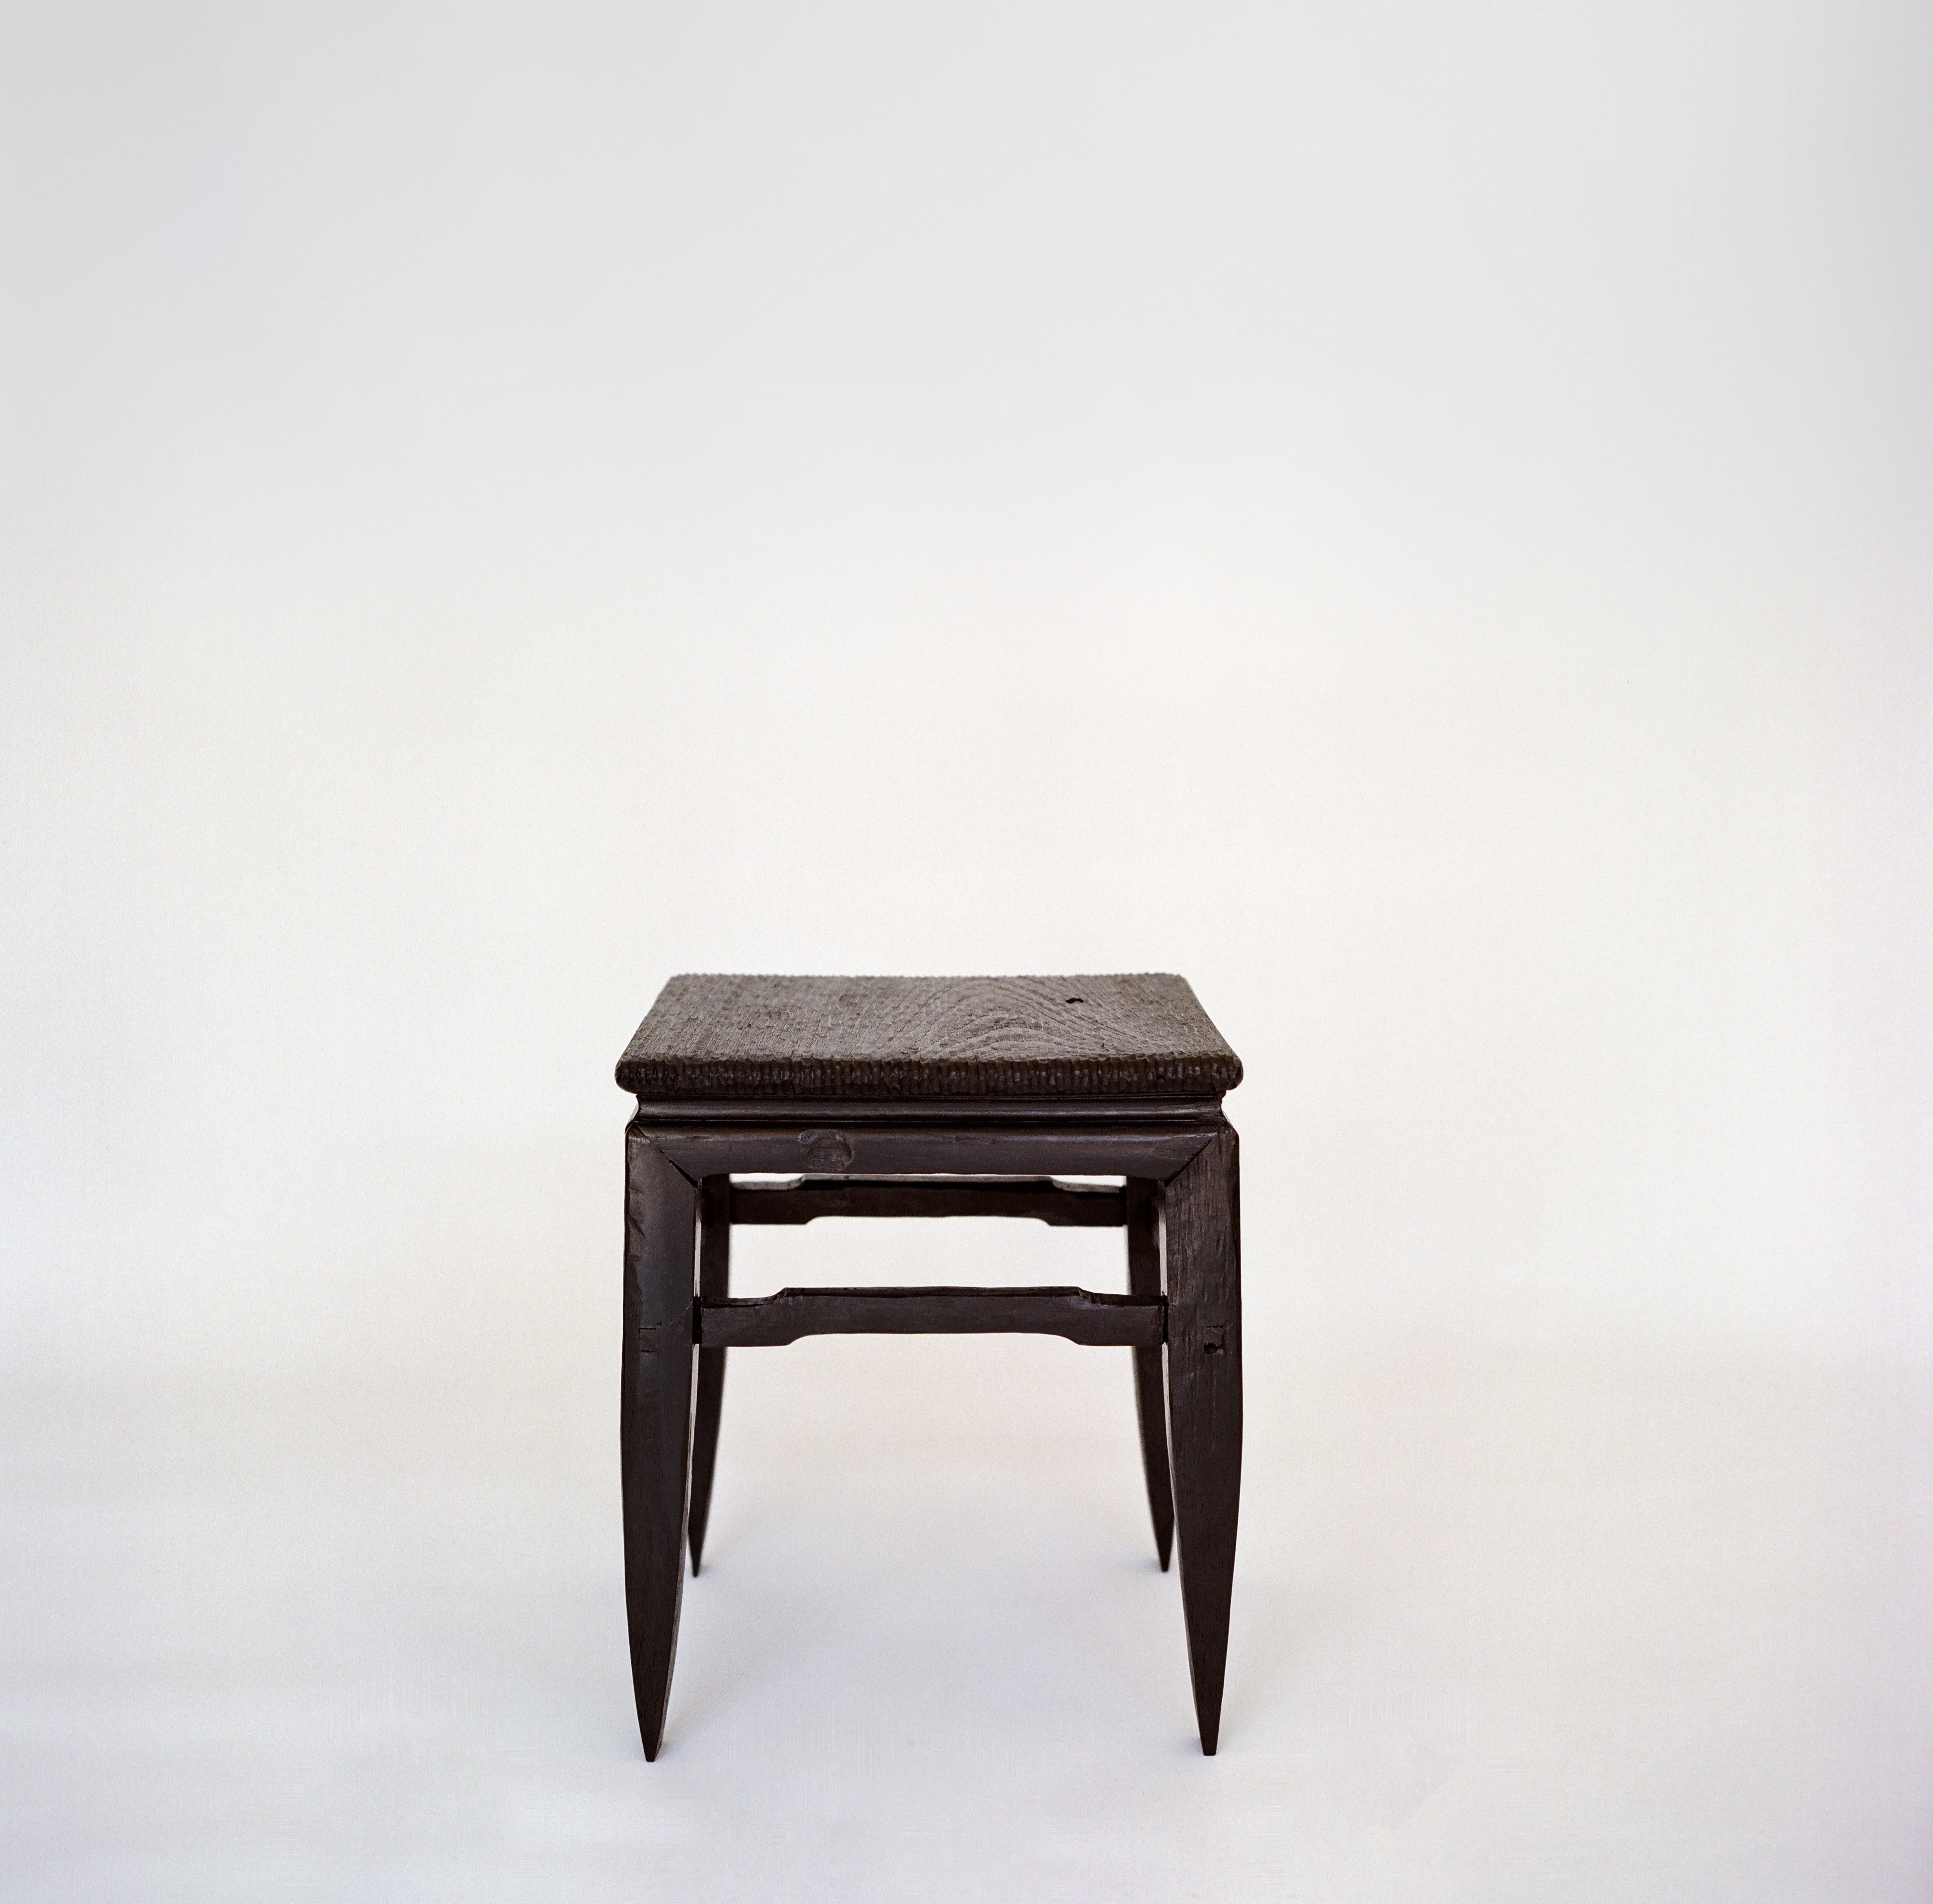 Found Ming side table by Henry D'ath
Dimensions:D40 x W40 x H50 cm
Materials:Wood, Calligraphy Ink

Piece is an alteration to a found object.

Henry d’ath is a new zealand born, hong kong based artist and architect. 
Using predominantly